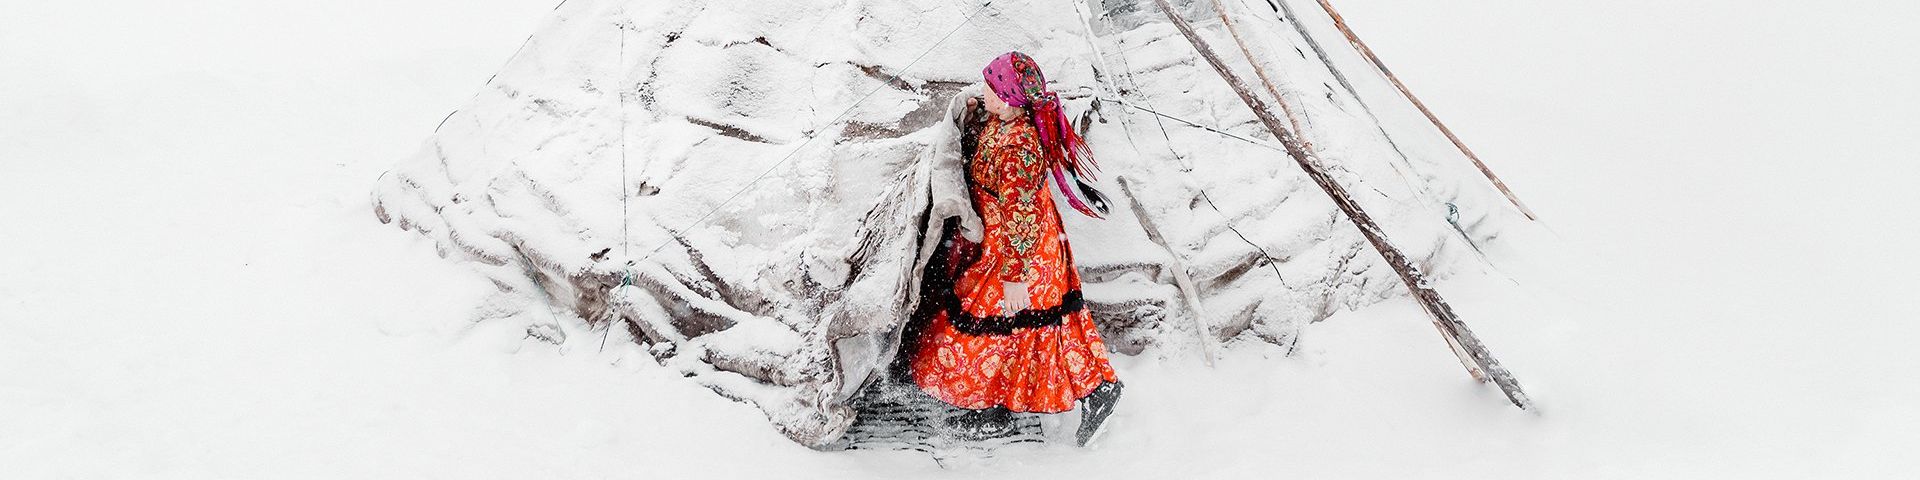 The image is dominated by pure white snow, save a snow-covered chum, or traditional tent used by the migrational tribes of the region. A woman emerges from her tent and is wearing a long orange/red patterned dress and boots. The dress has a black trim midway up the skirt and she also wears a pink headscarf, tied at the back of her head, which swings behind her.